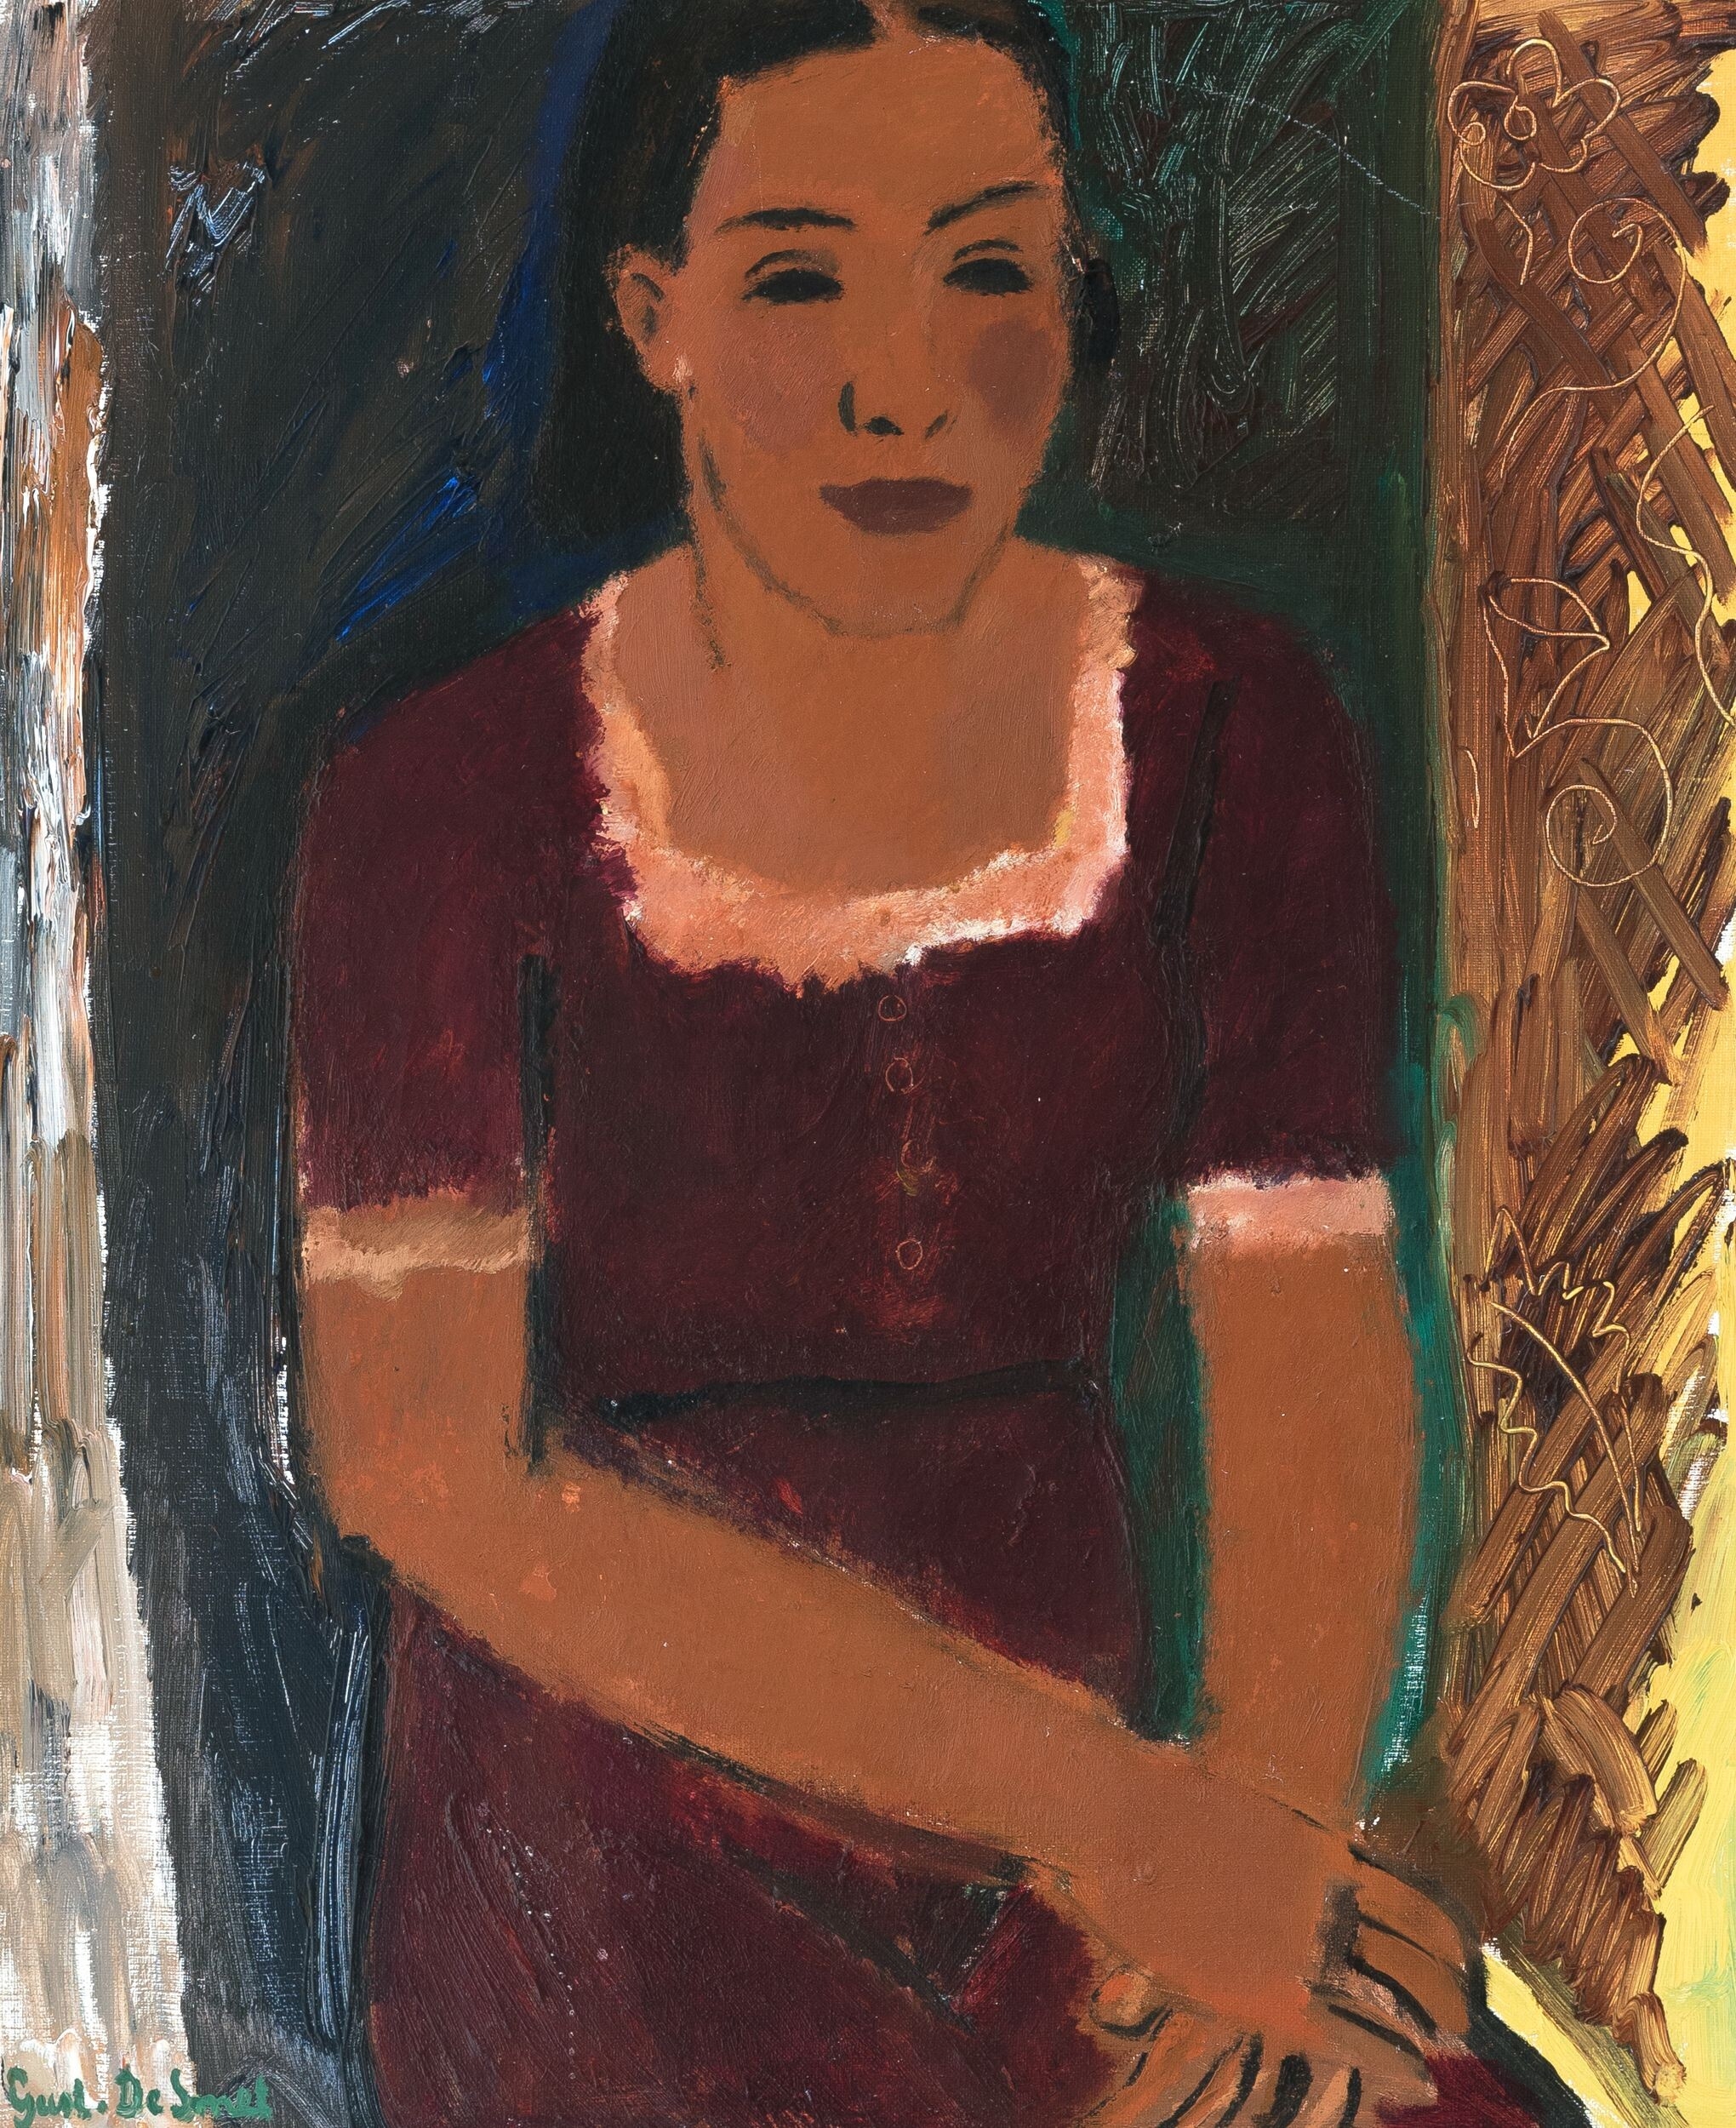 Artwork by Gustave de Smet, Girl with red dress, Made of Oil on canvas